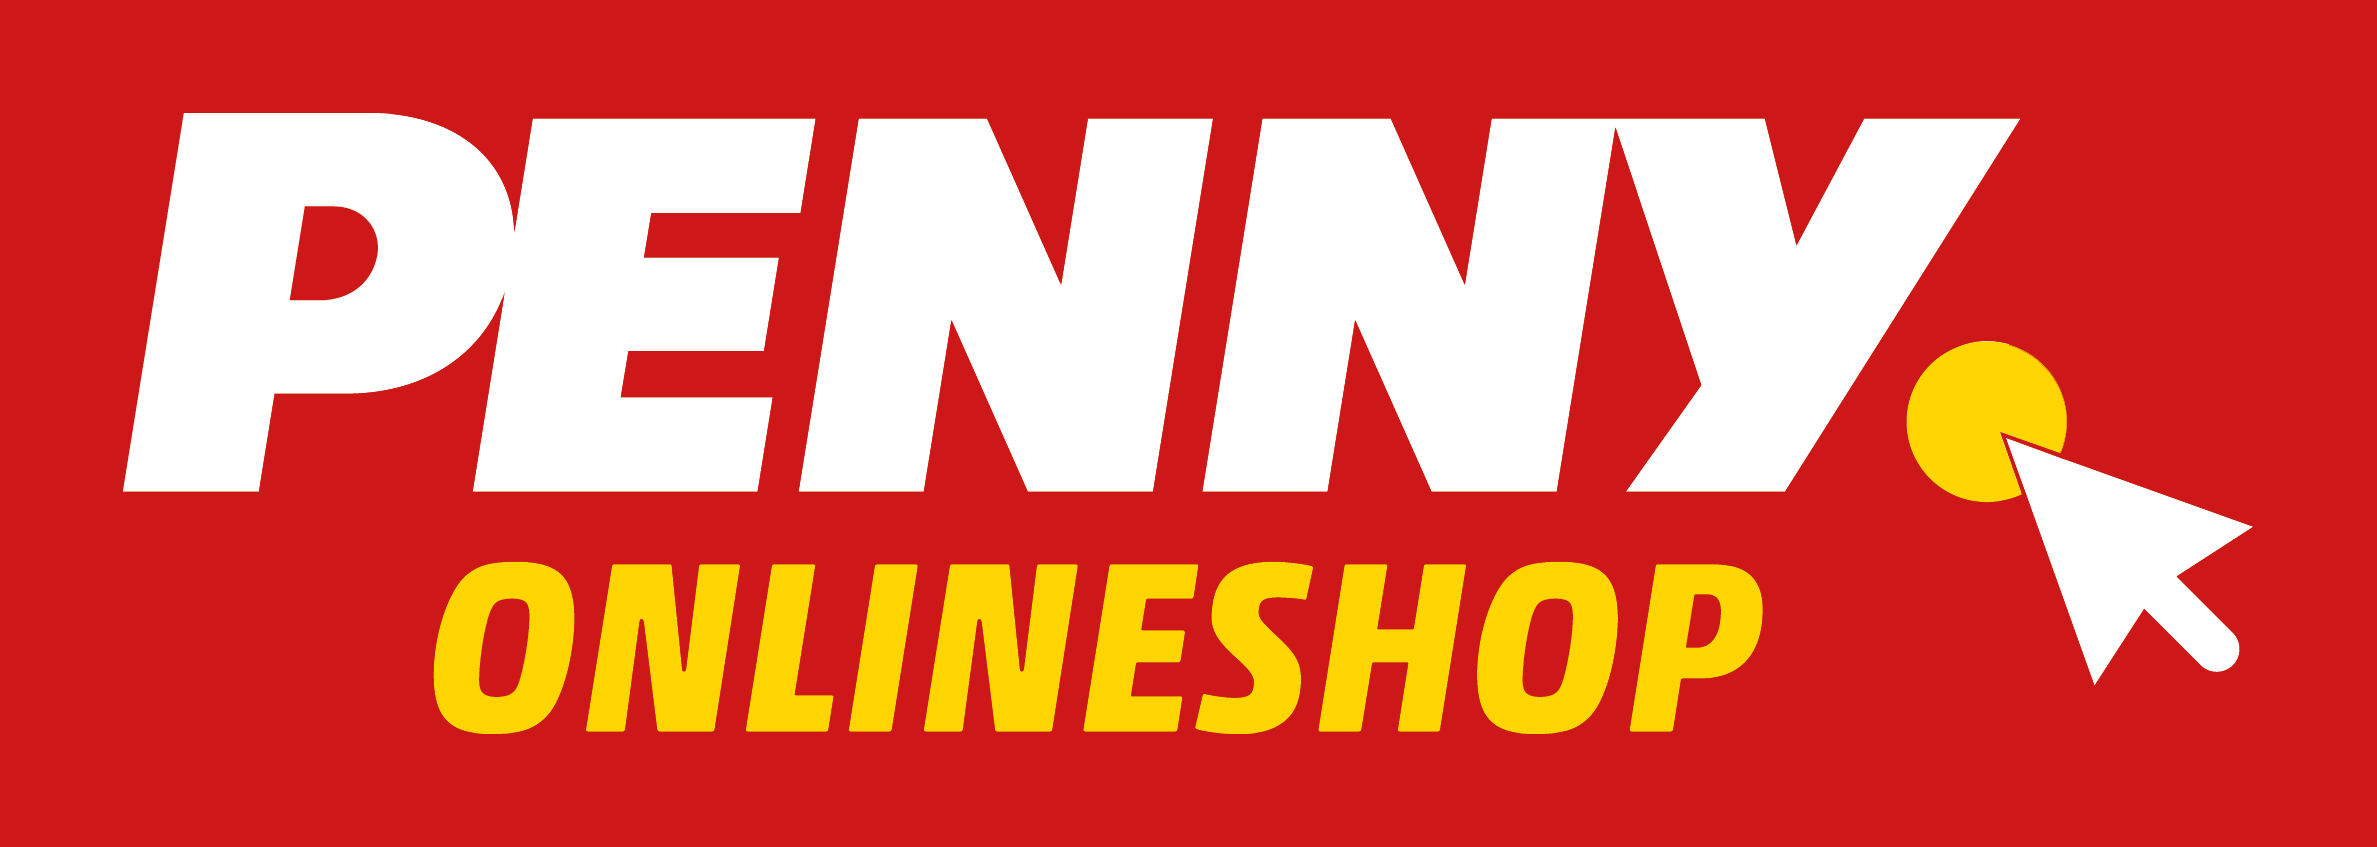 AKTUELL_Logo_Penny_Onlineshop.png